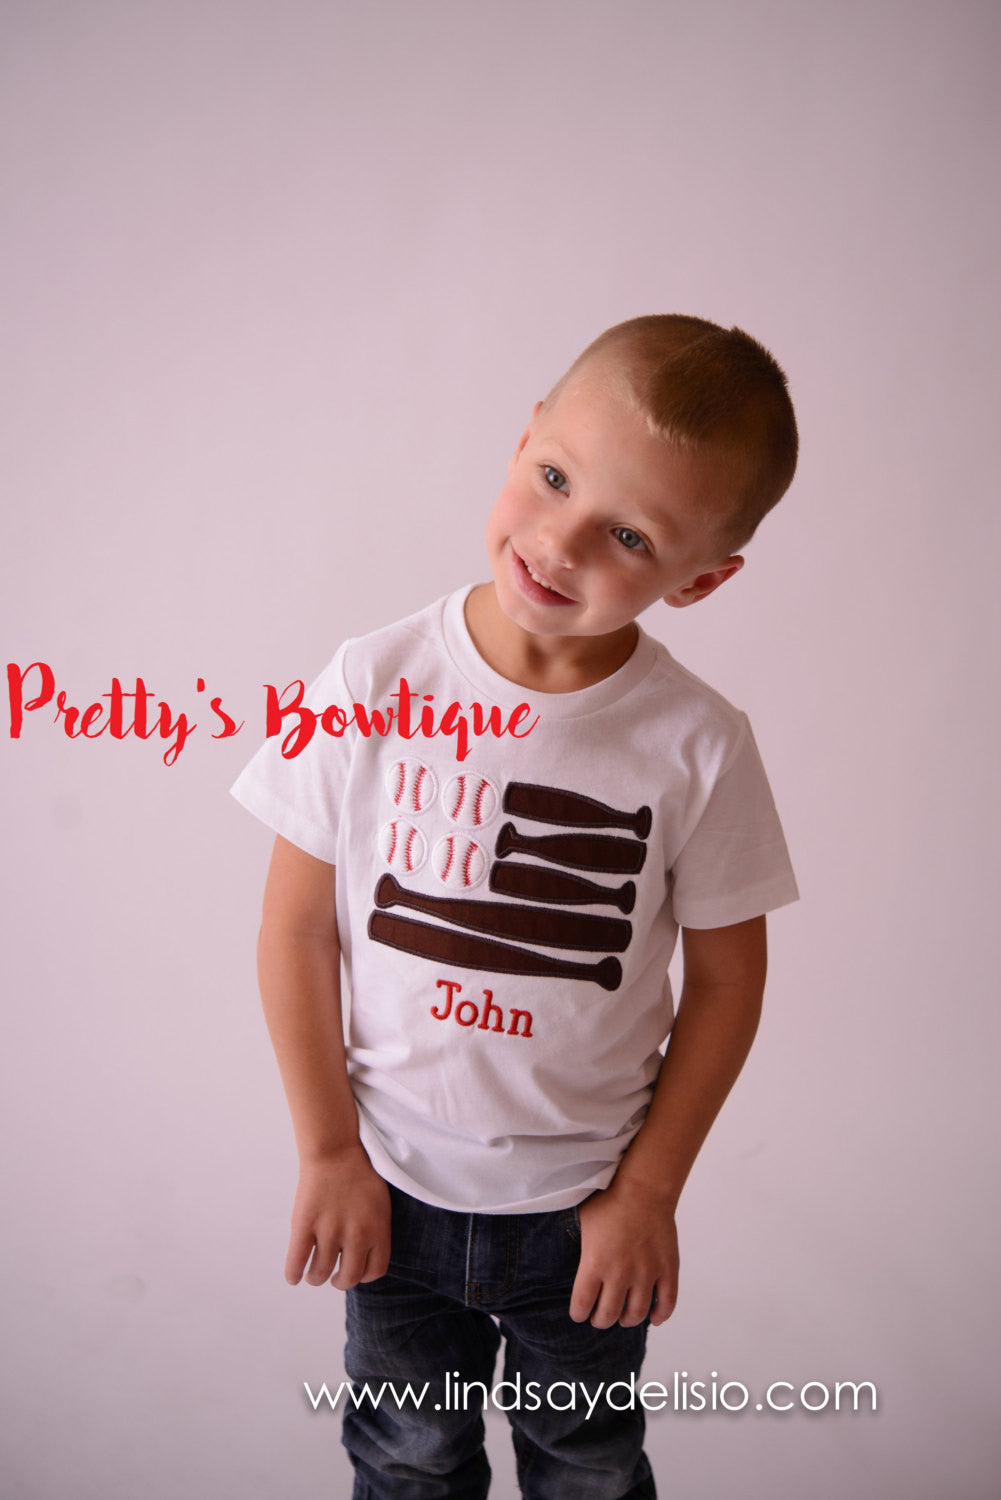 Personalized Baseball Shirts For Kids, Toddlers, and the Entire